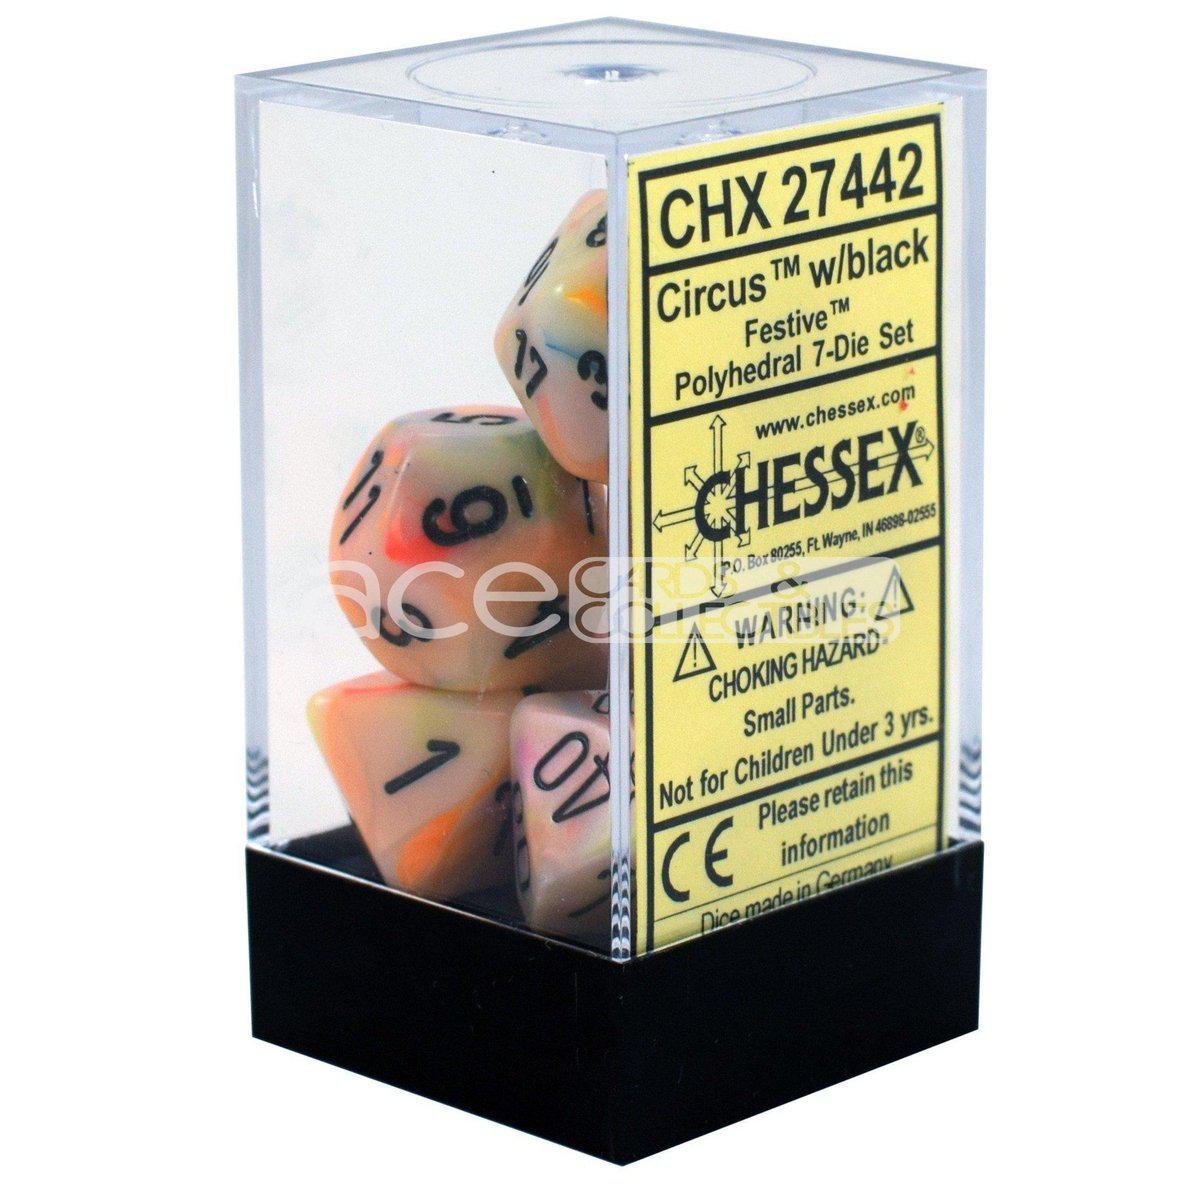 Chessex Festive Polyhedral 7pcs Dice (Circus/Black) [CHX27442]-Chessex-Ace Cards & Collectibles